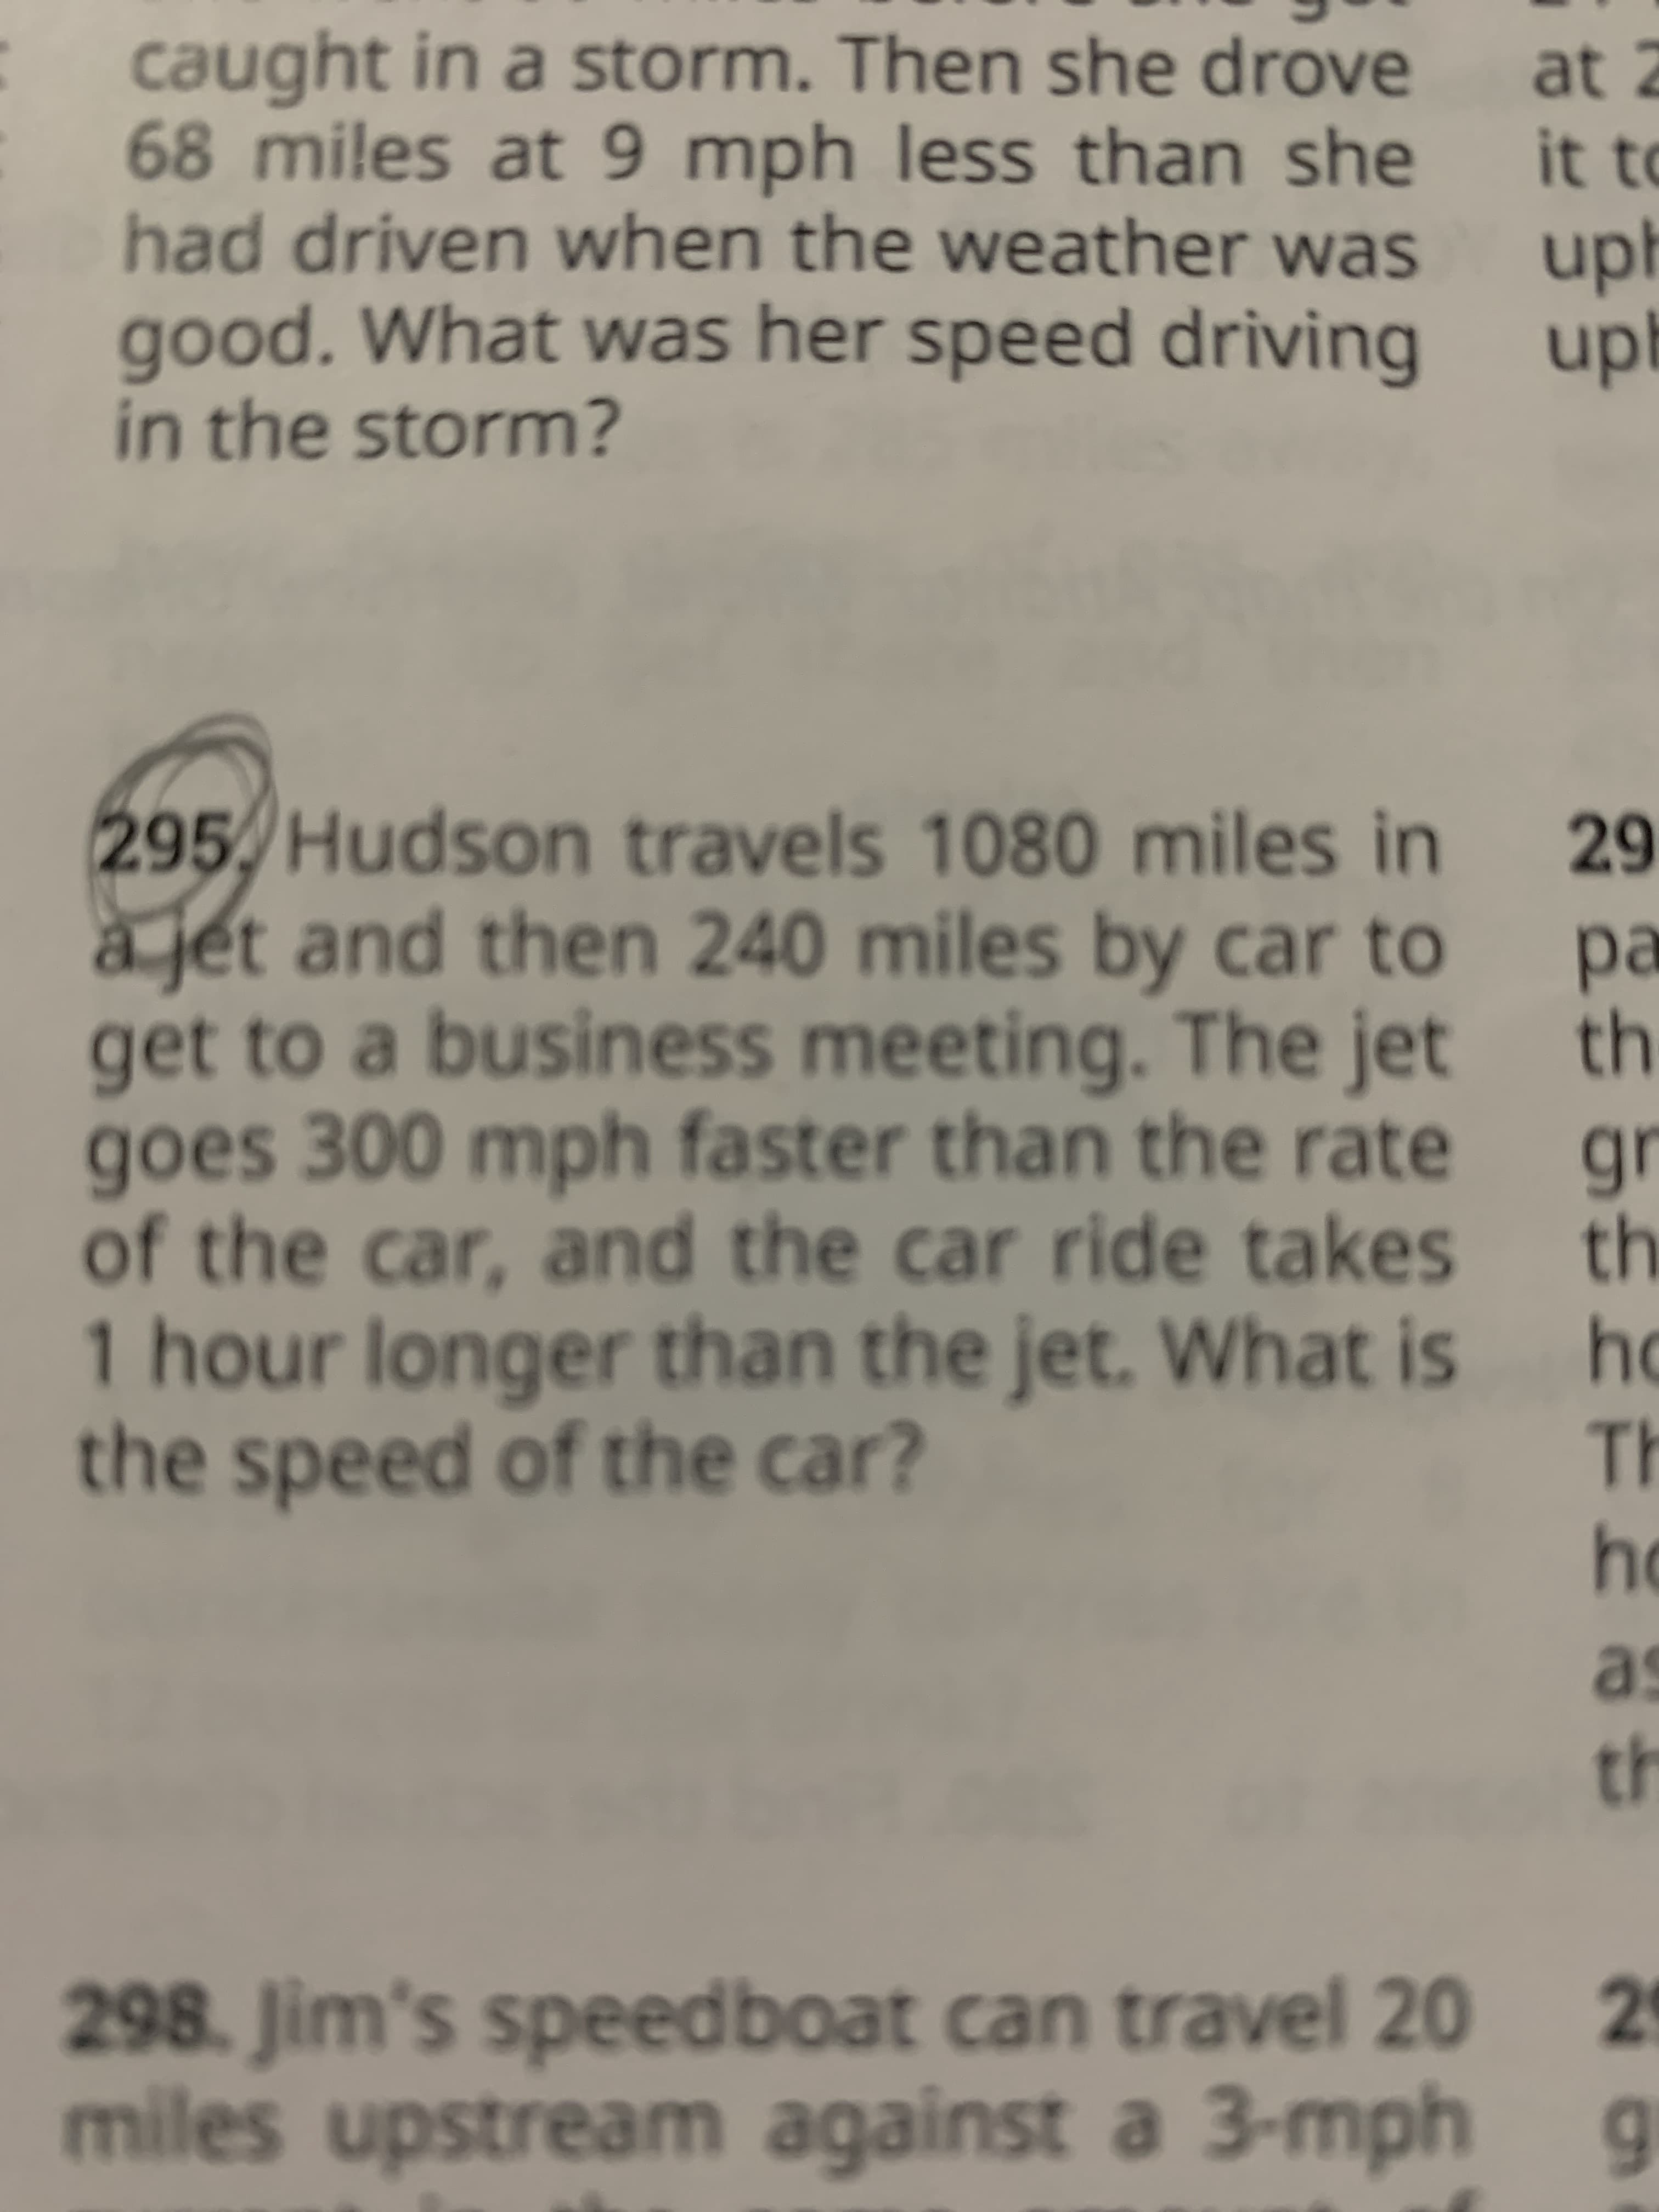 295, Hudson travels 1080 miles in
à jet and then 240 miles by car to
get to a business meeting. The jet
goes 300 mph faster than the rate
of the car, and the car ride takes
1 hour longer than the jet. What is
the speed of the car?
